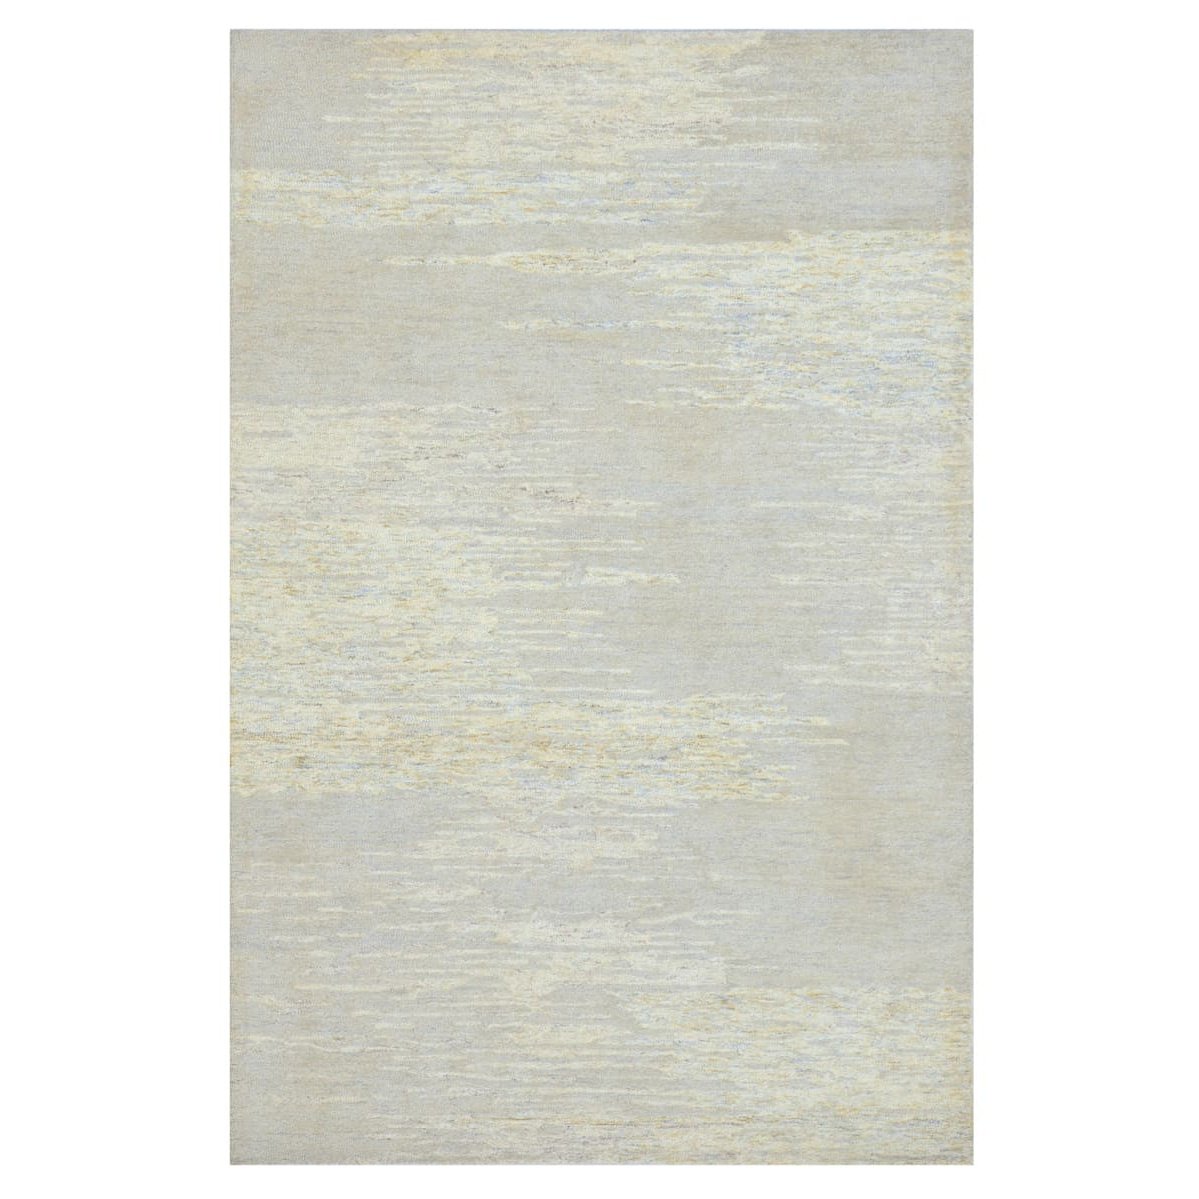 White barn Hand Tufted Wool Rug (5x8) By House of Rugs - Home Artisan